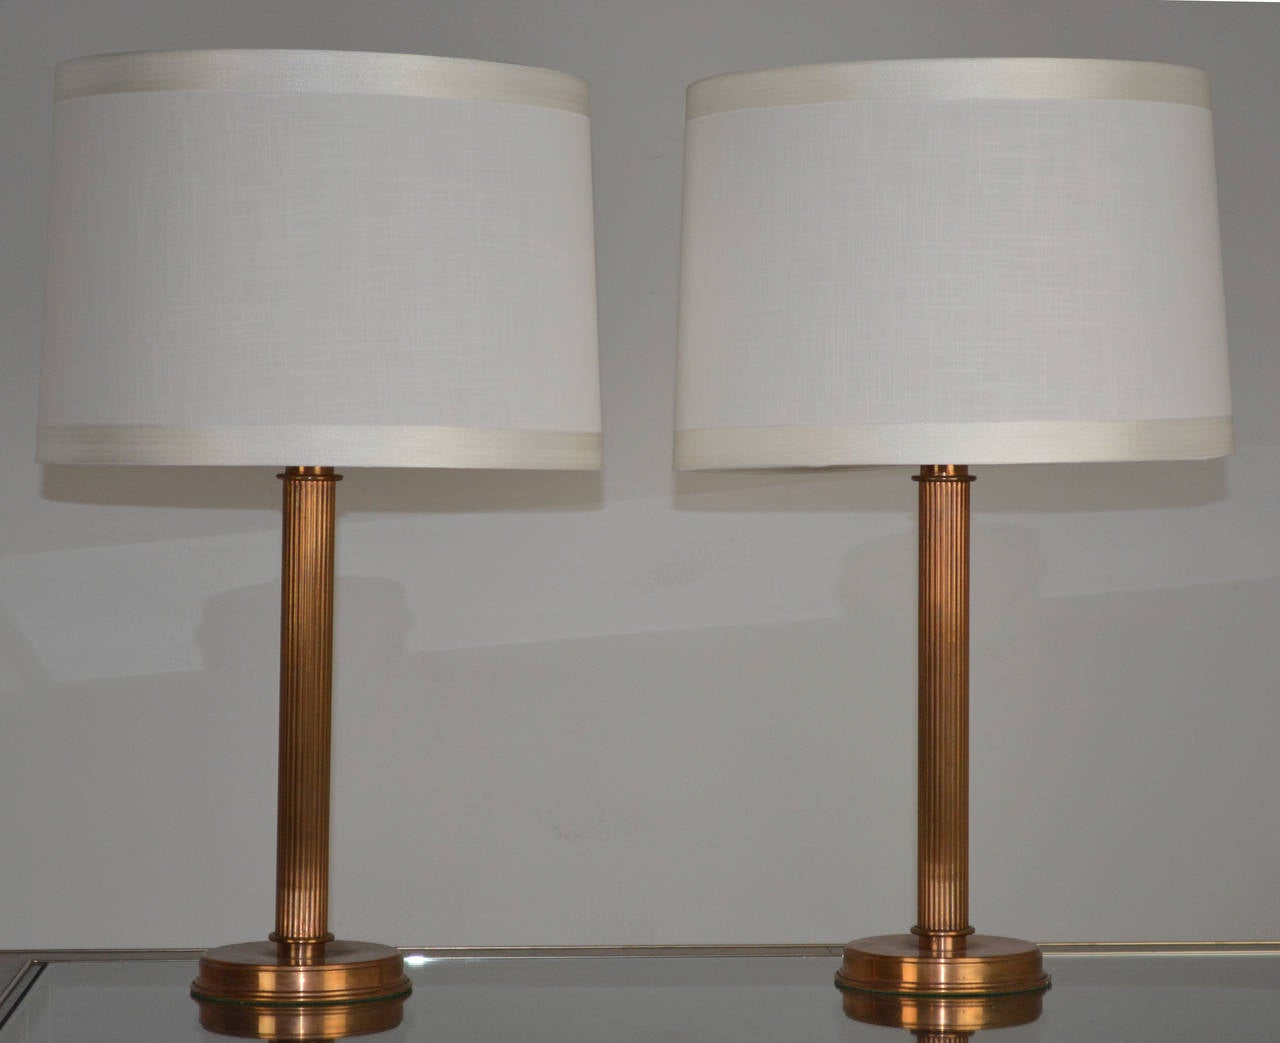 Interesting pair of lamps with a copper finish comprising a reeded column on a circular disc base